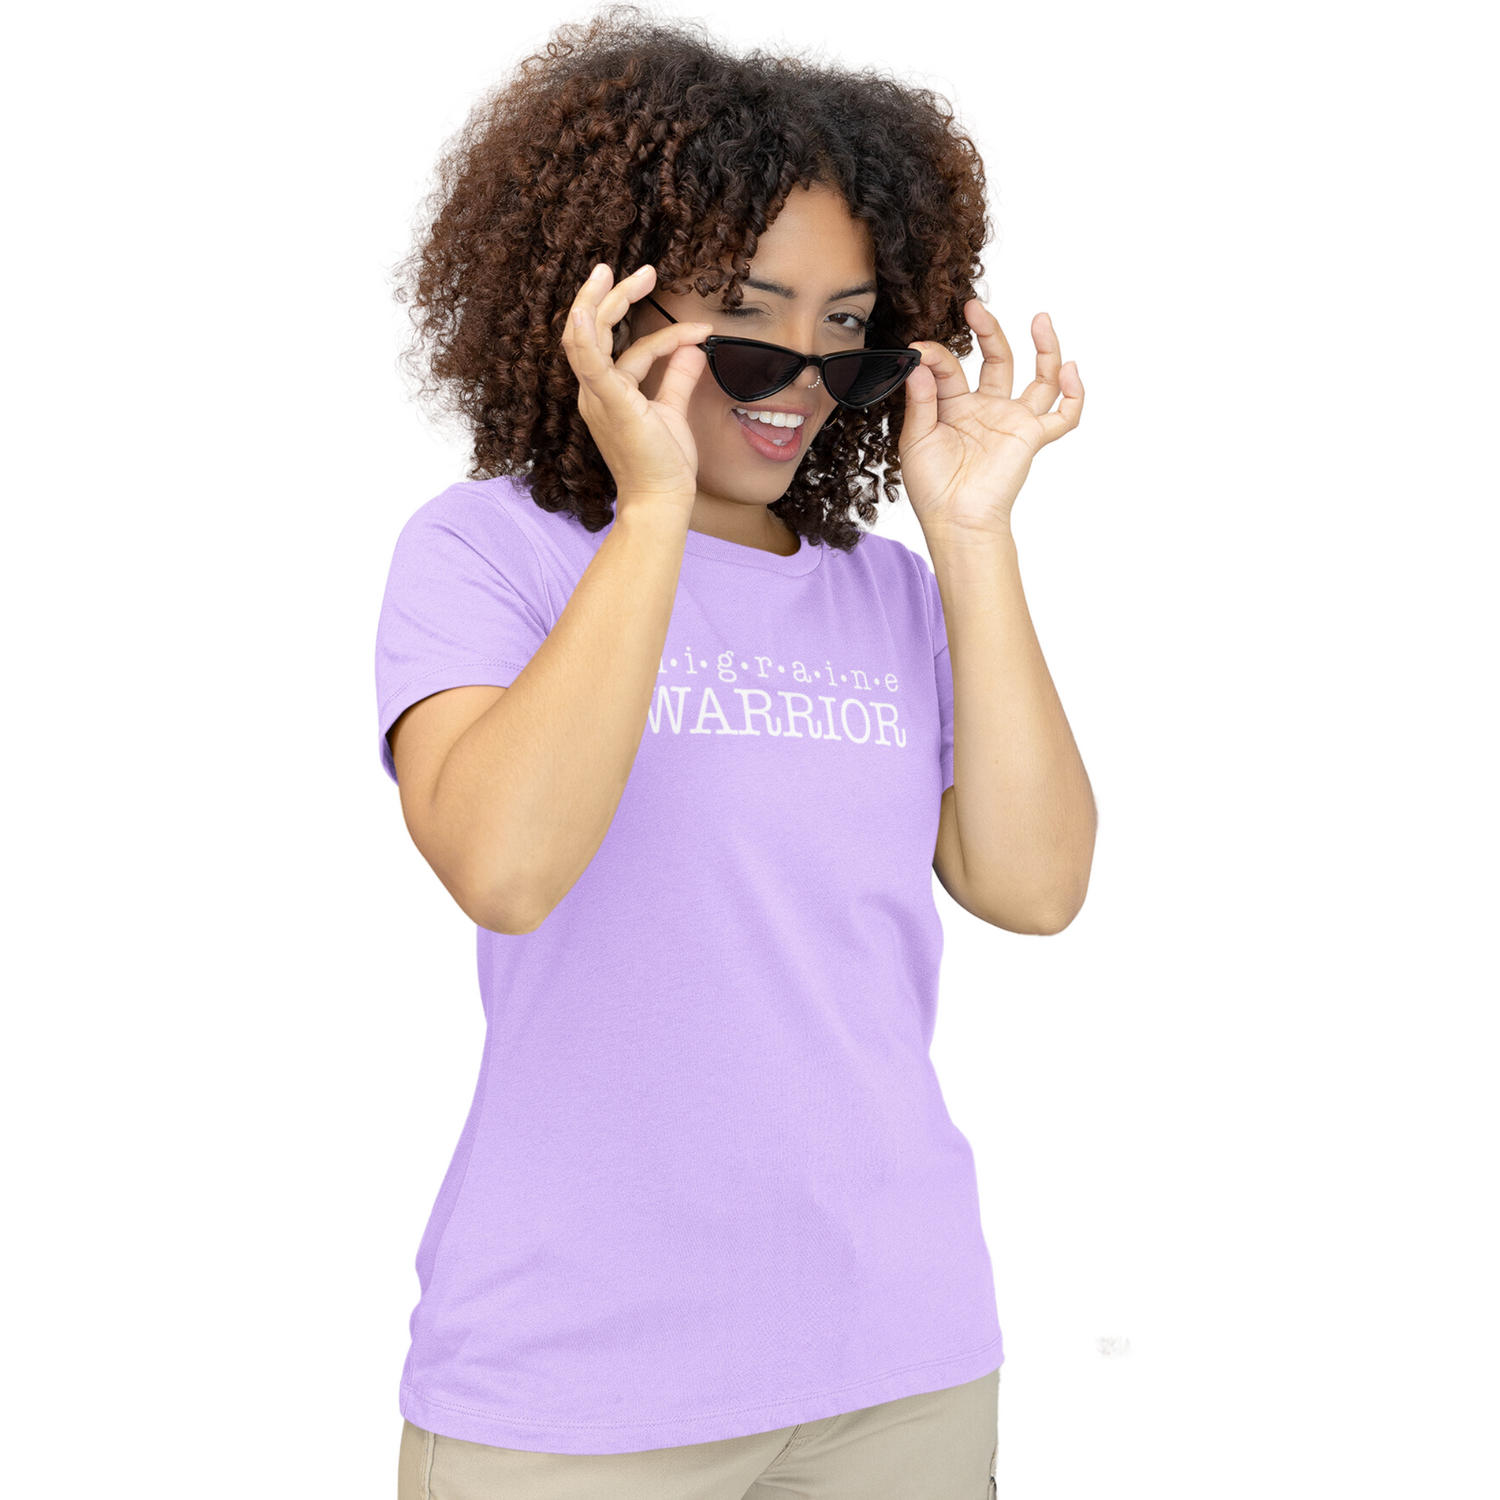 Girl with curly hair wearing sunglasses with a lavender migraine warrior t-shirt